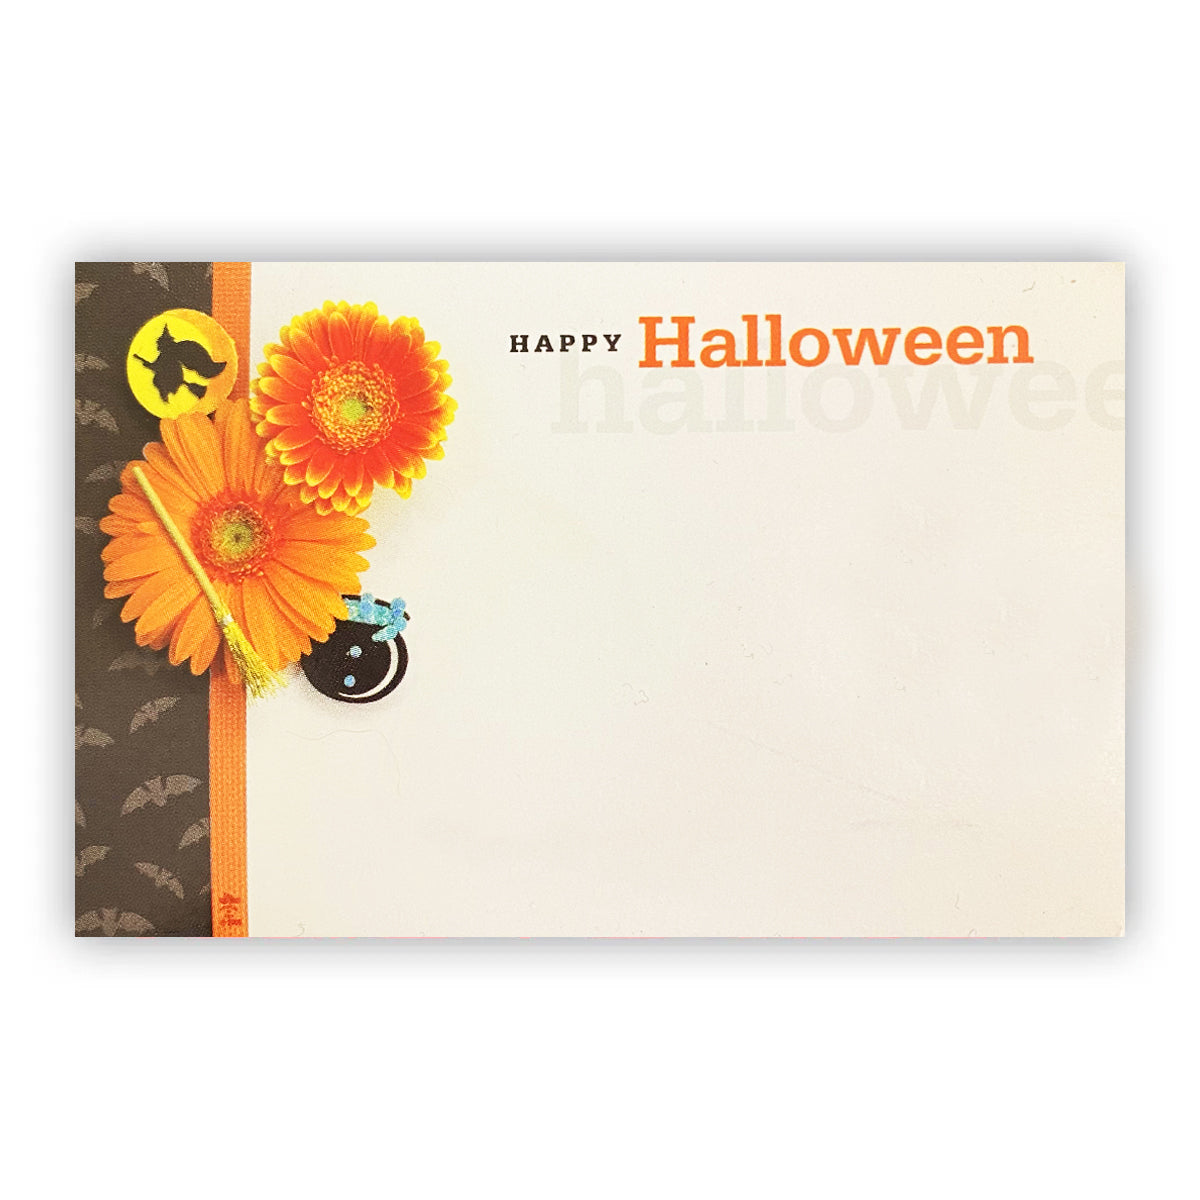 Happy Halloween Enclosure Cards | 50 Count | Clearance - While Supplies Last